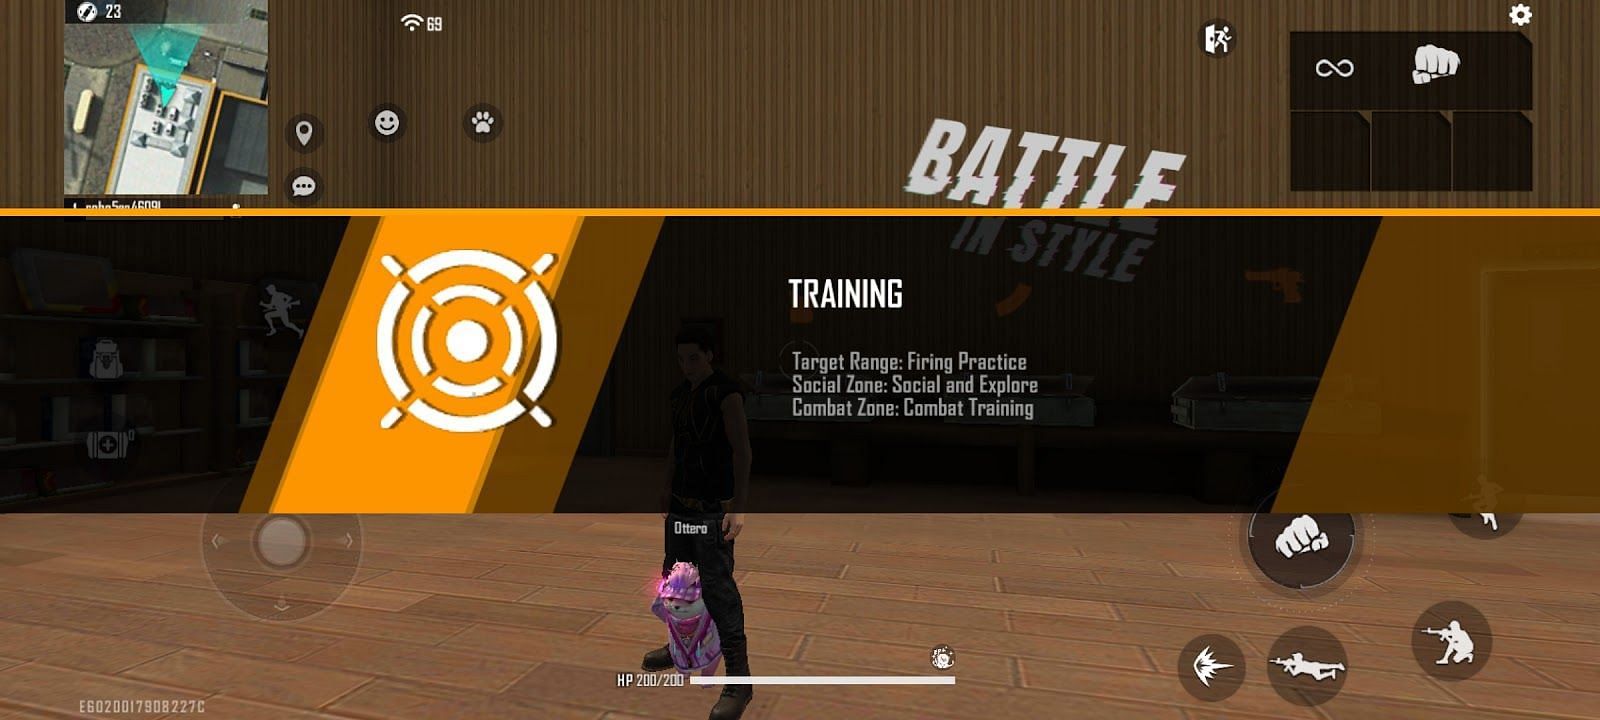 Training mode helps in learning movement tricks and mastering weapons (Image via Garena)